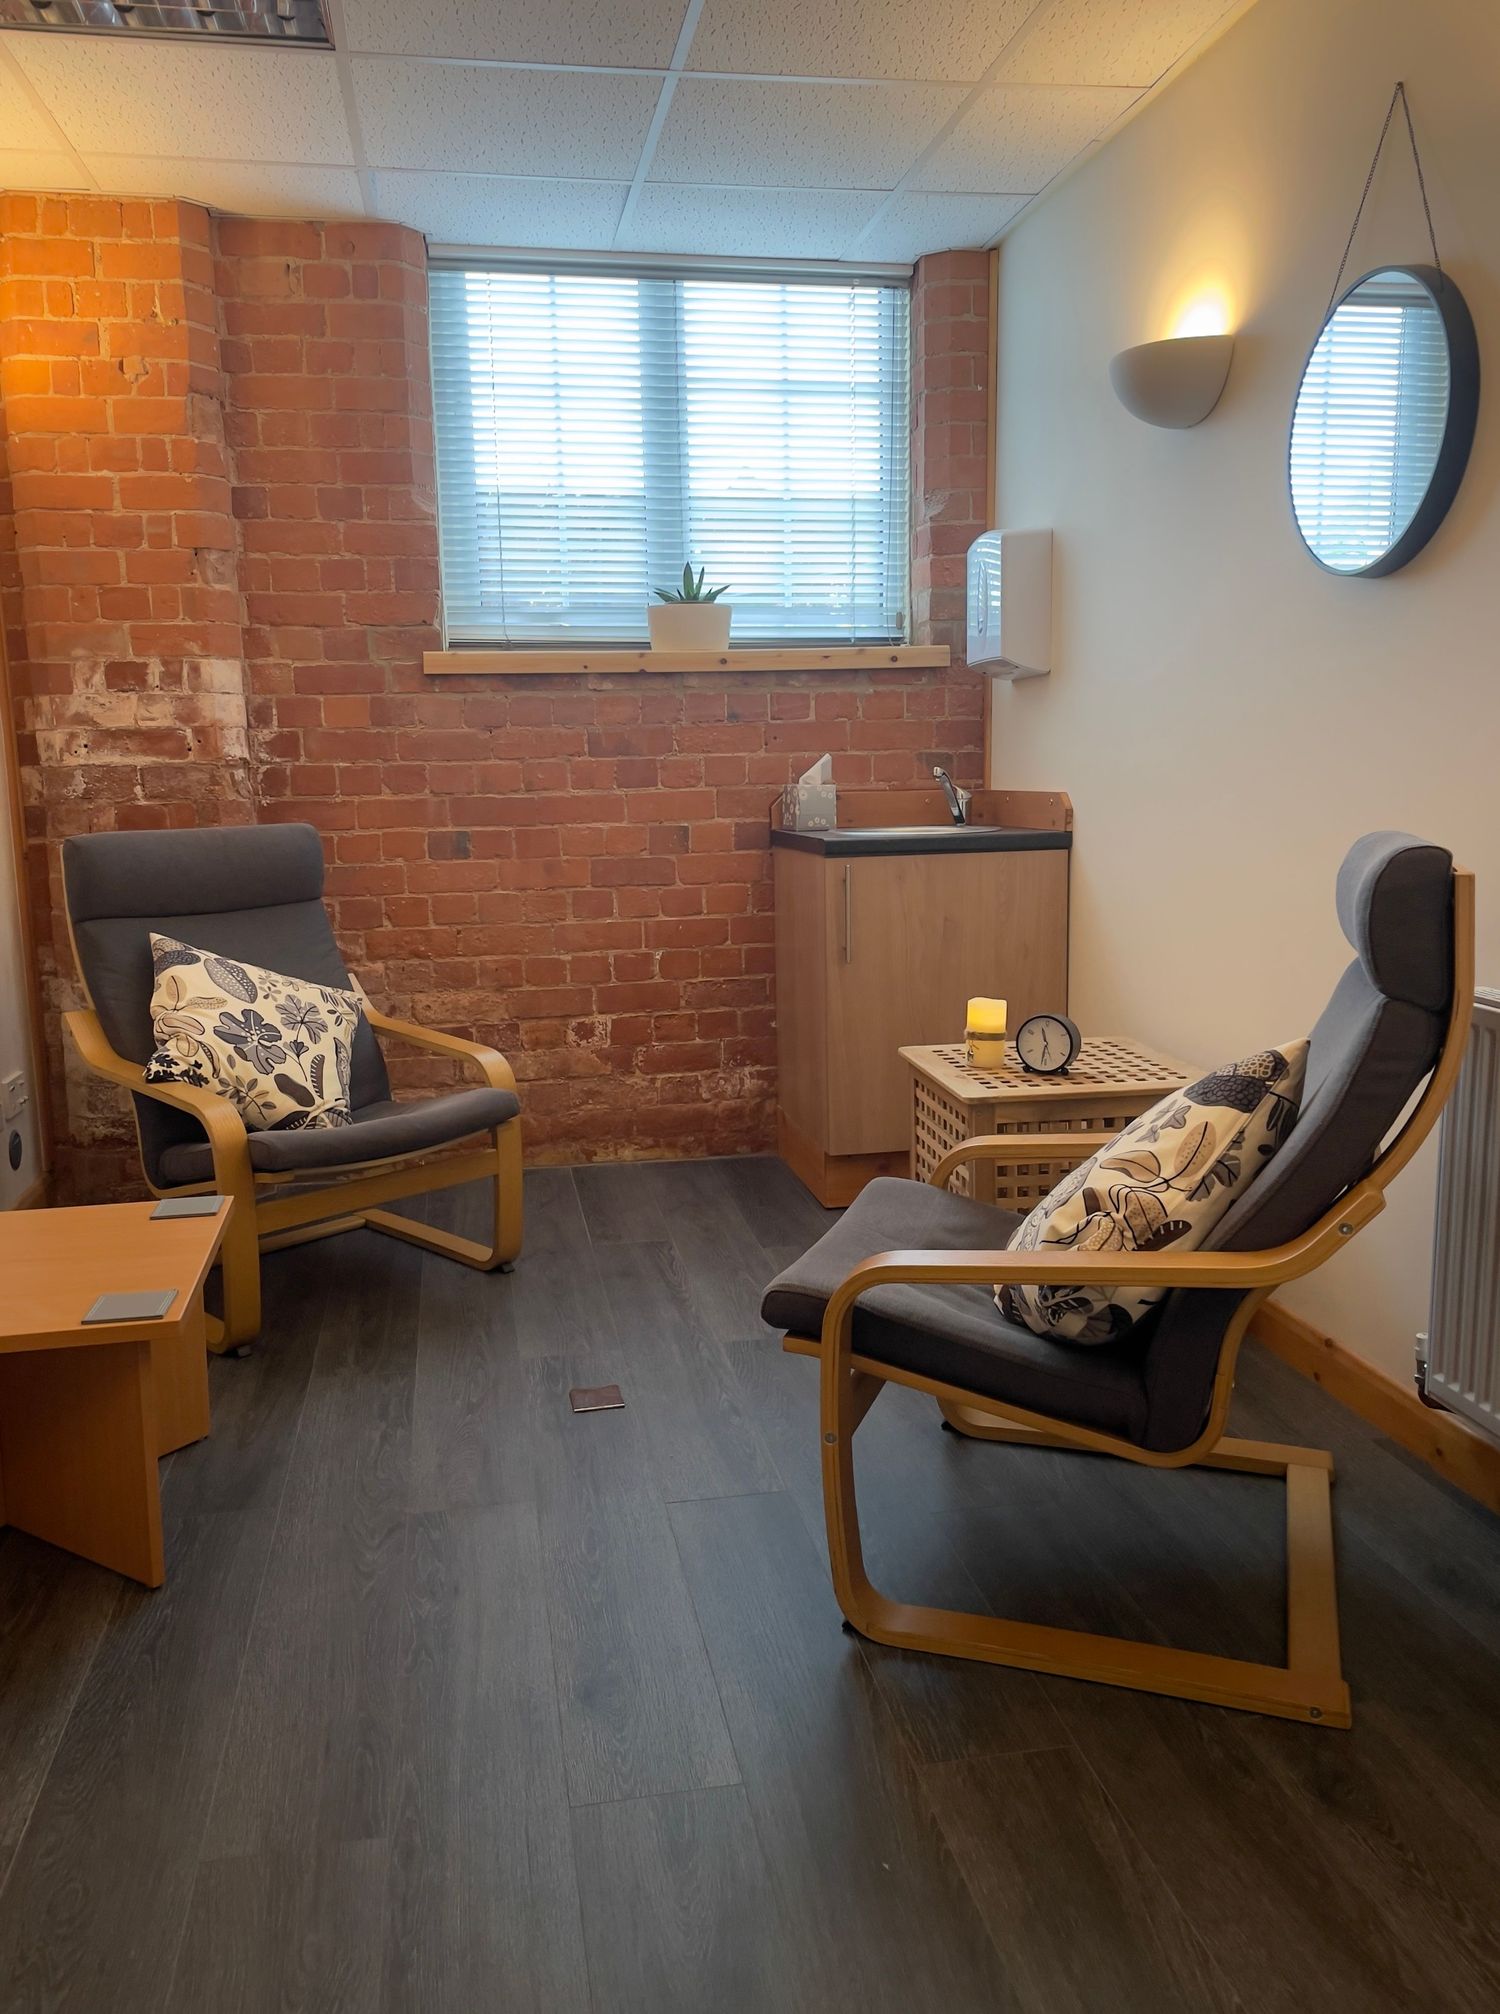 Gallery Photo of Counselling Room at Humber Therapy Centre